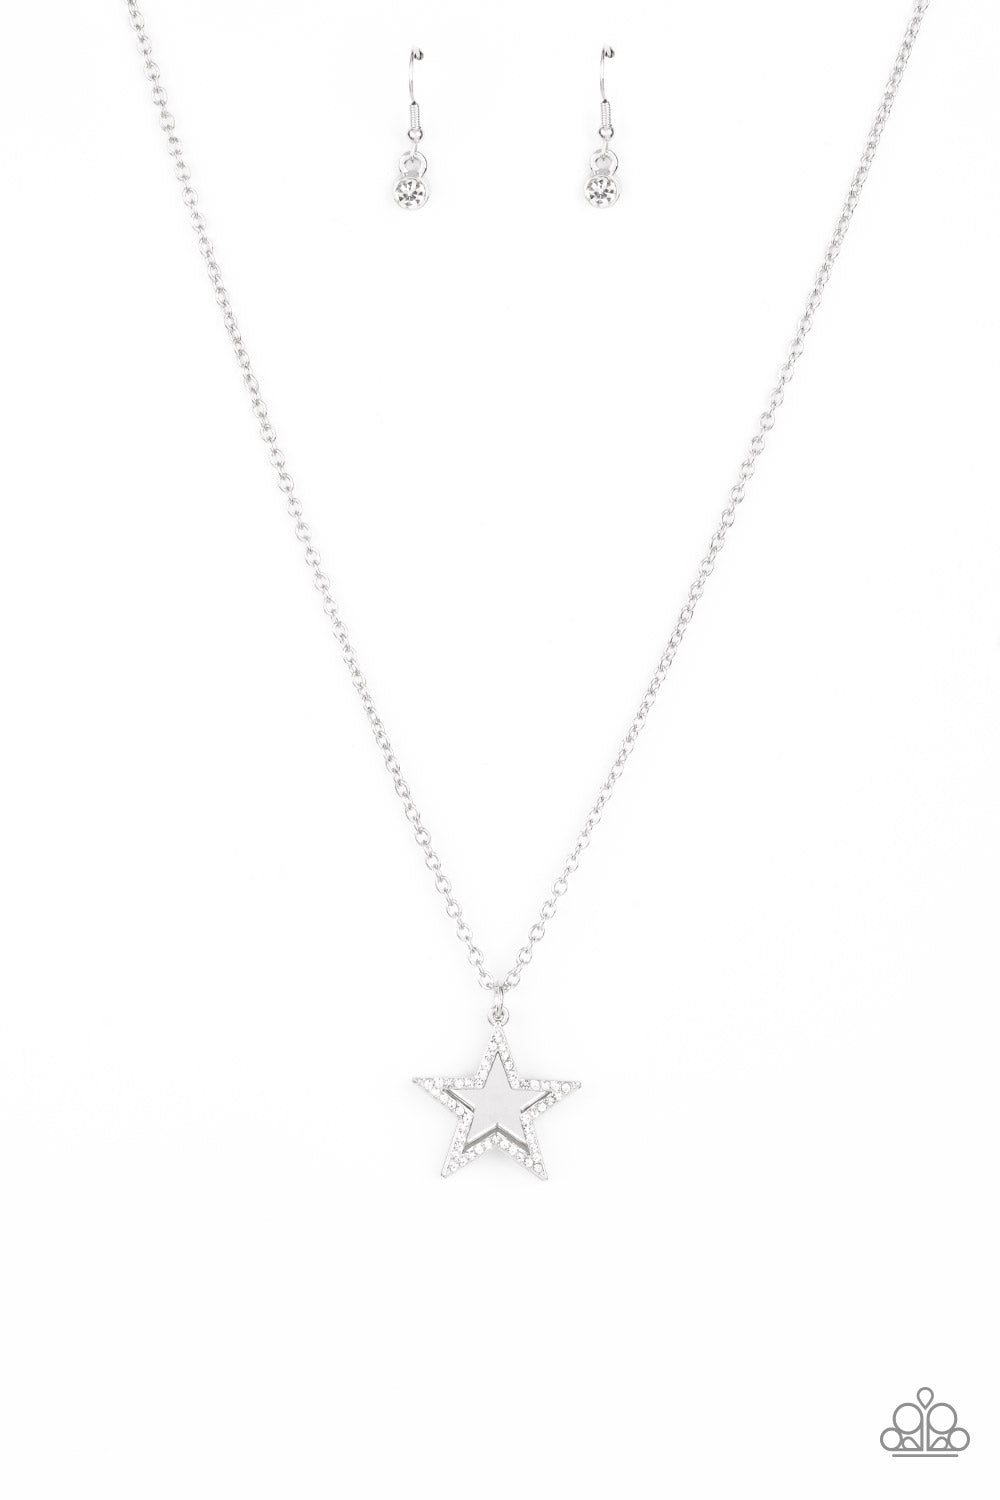 A white rhinestone encrusted silver star delicately overlaps with a shiny silver star below the collar, creating a sparkly patriotic pendant. Features an adjustable clasp closure.  Sold as one individual necklace. Includes one pair of matching earrings.